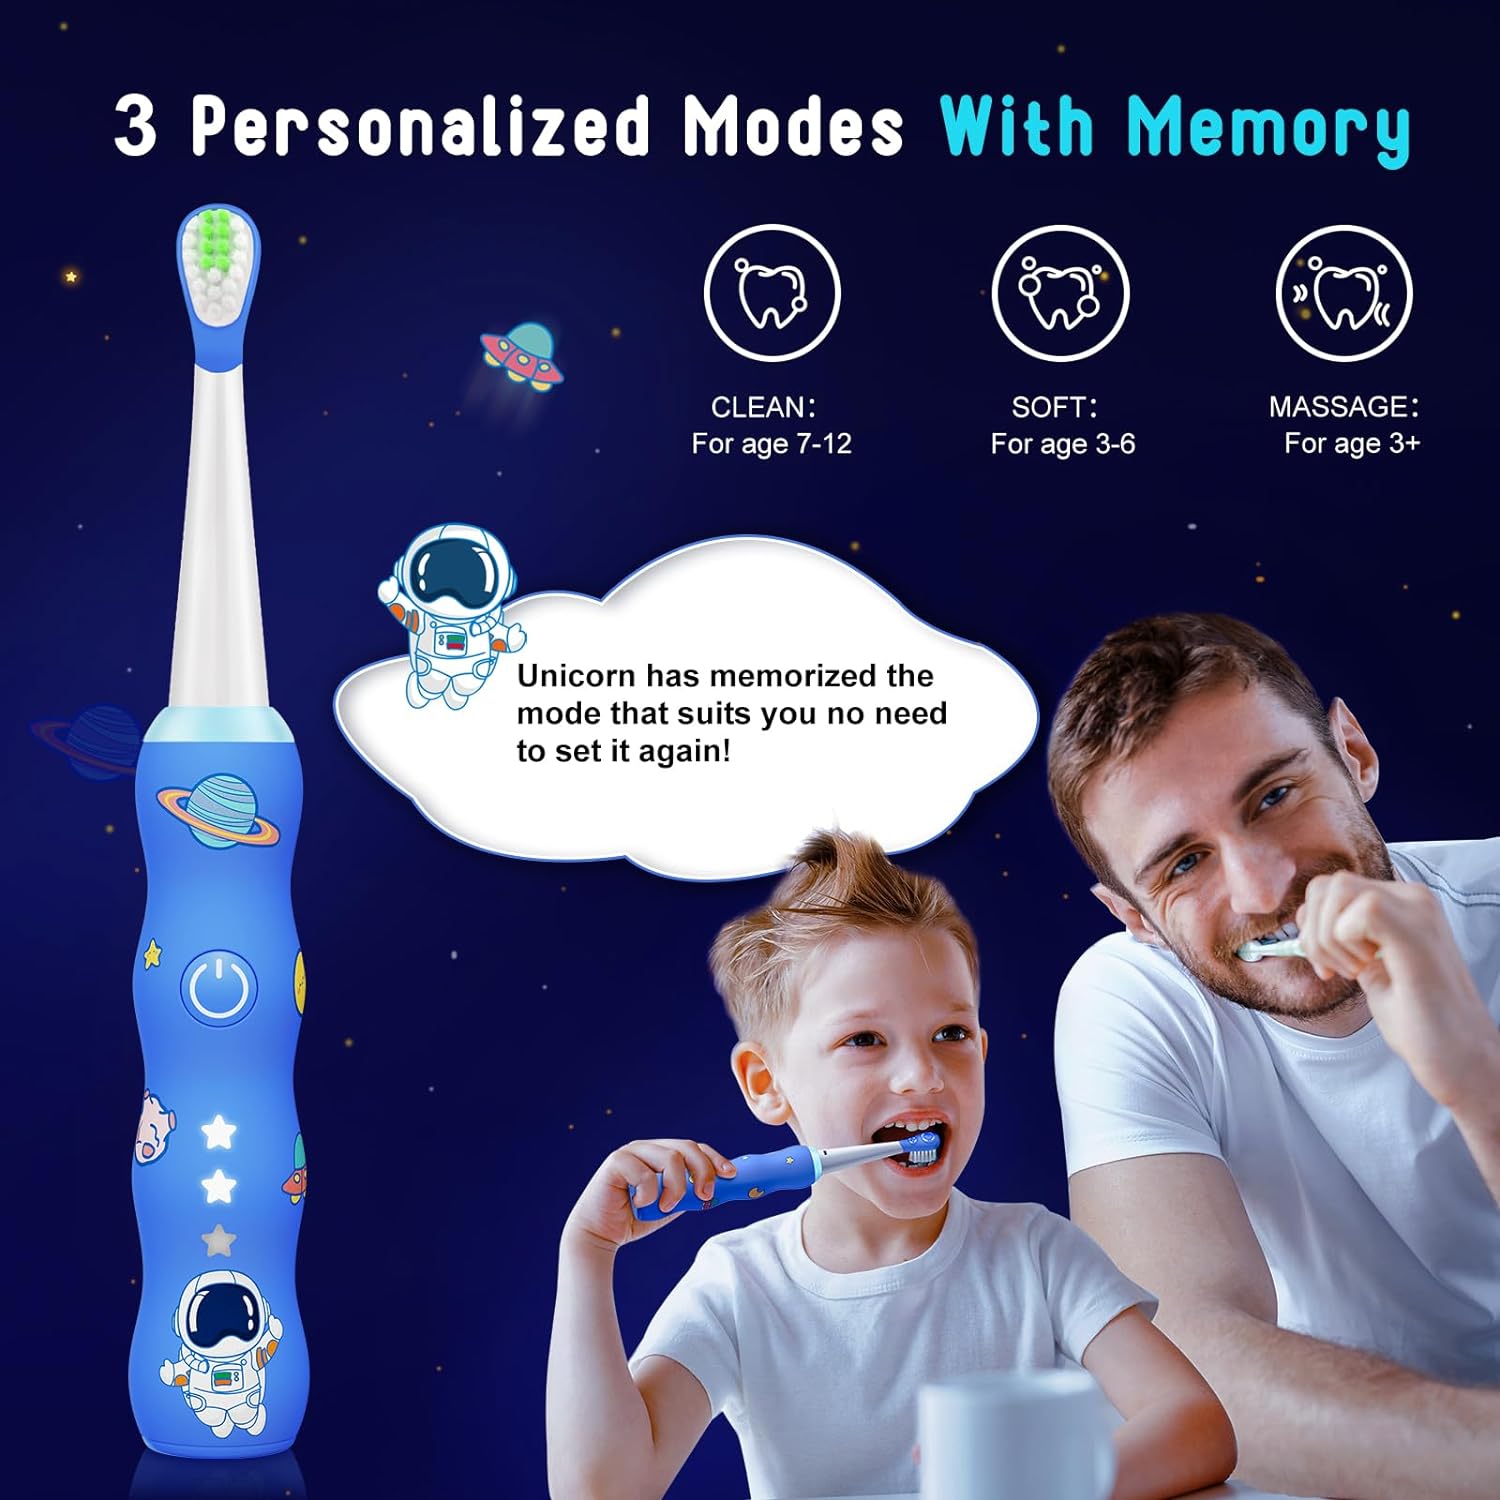 D603 Kids Electric Toothbrush for Boys Girls